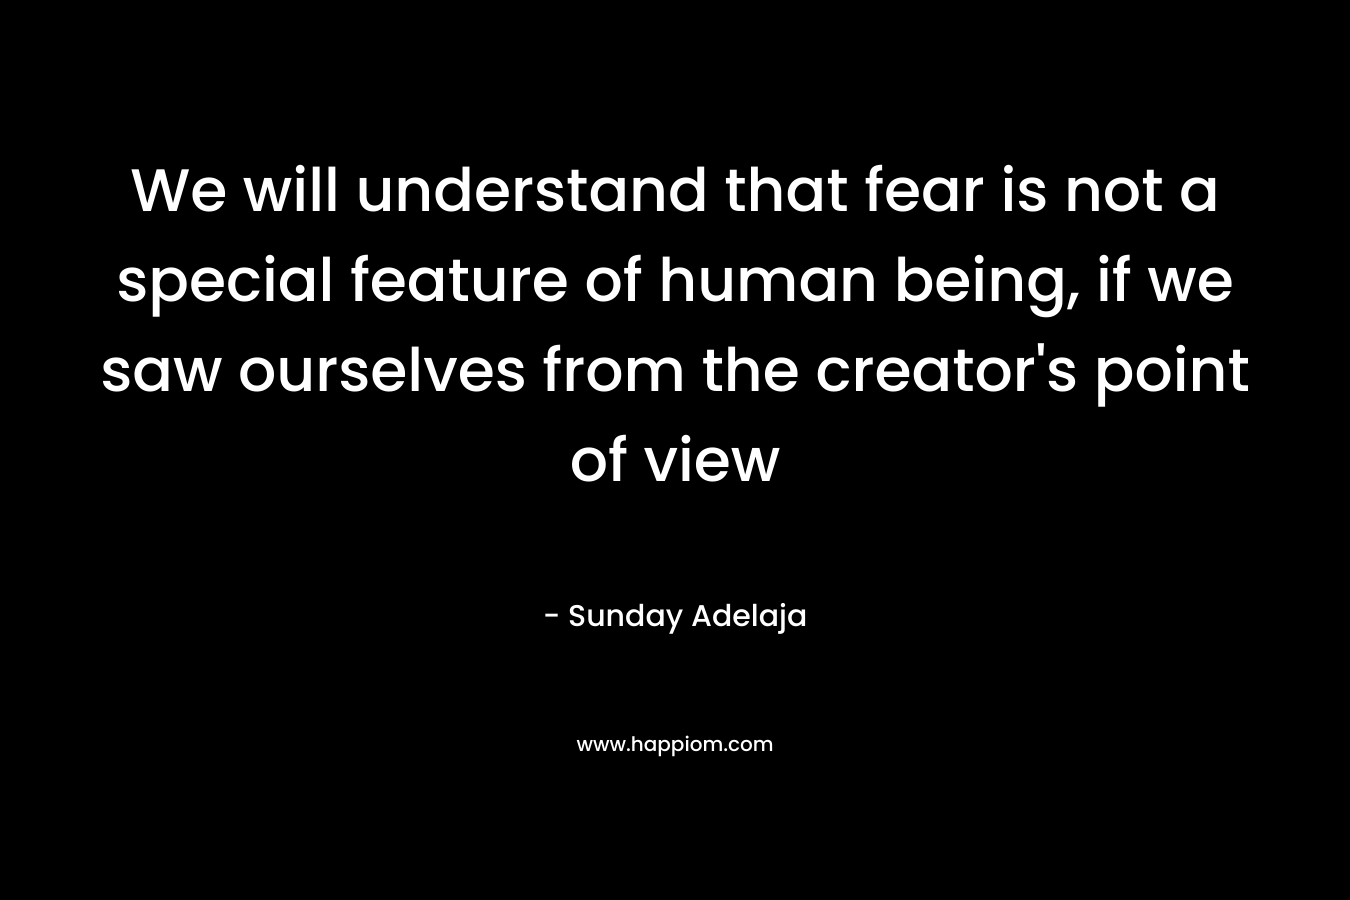 We will understand that fear is not a special feature of human being, if we saw ourselves from the creator's point of view